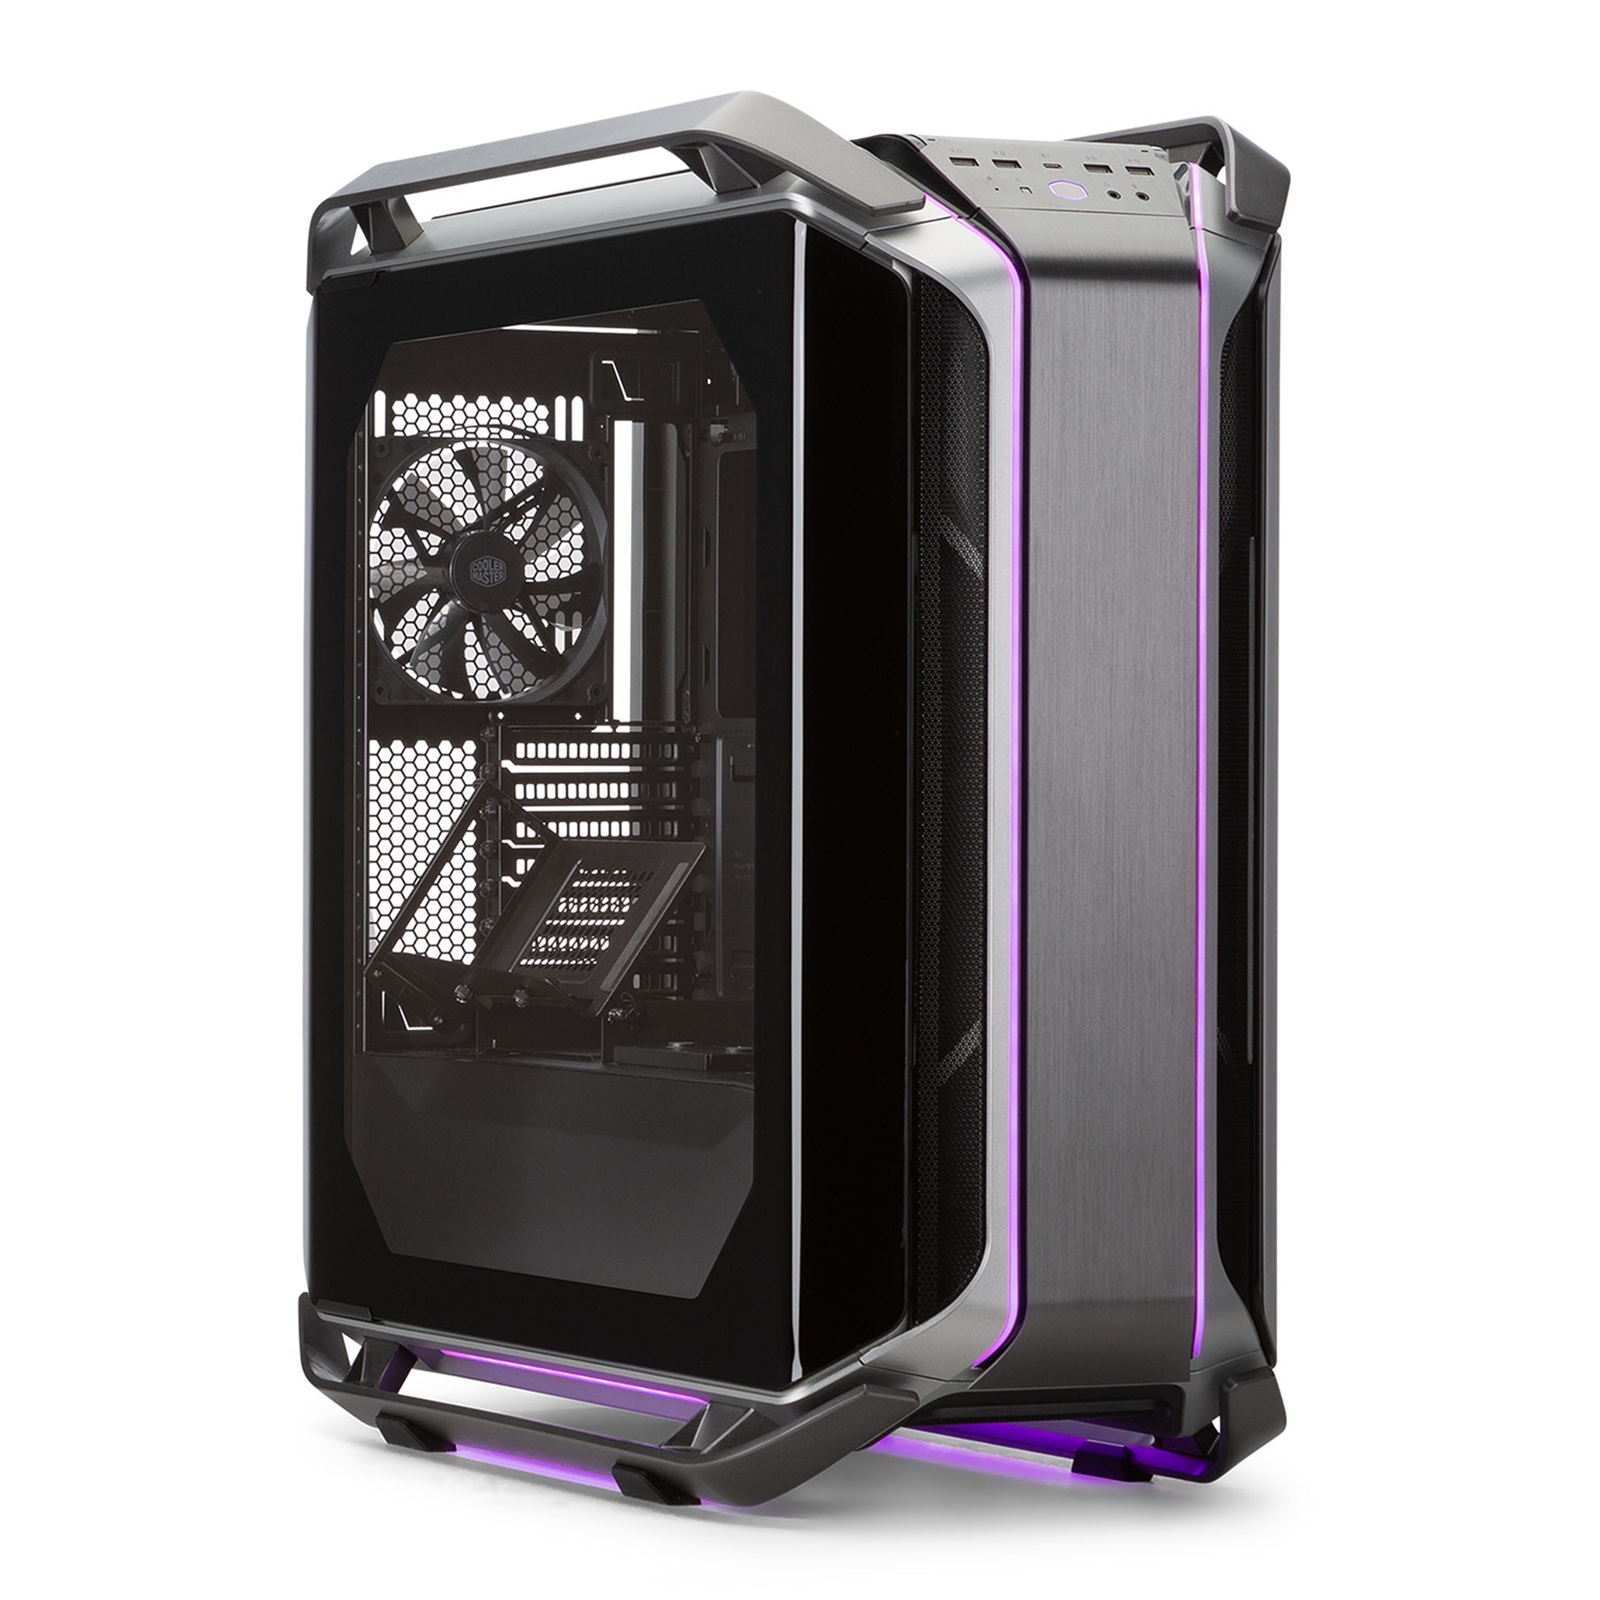 Cooler Master Cosmos C700M case, Full Tower Chassis w/ Curved Tempered Glass, 4x140mm Fans,ARGB Lighting, E-ATX/ATX/mATX/mITX